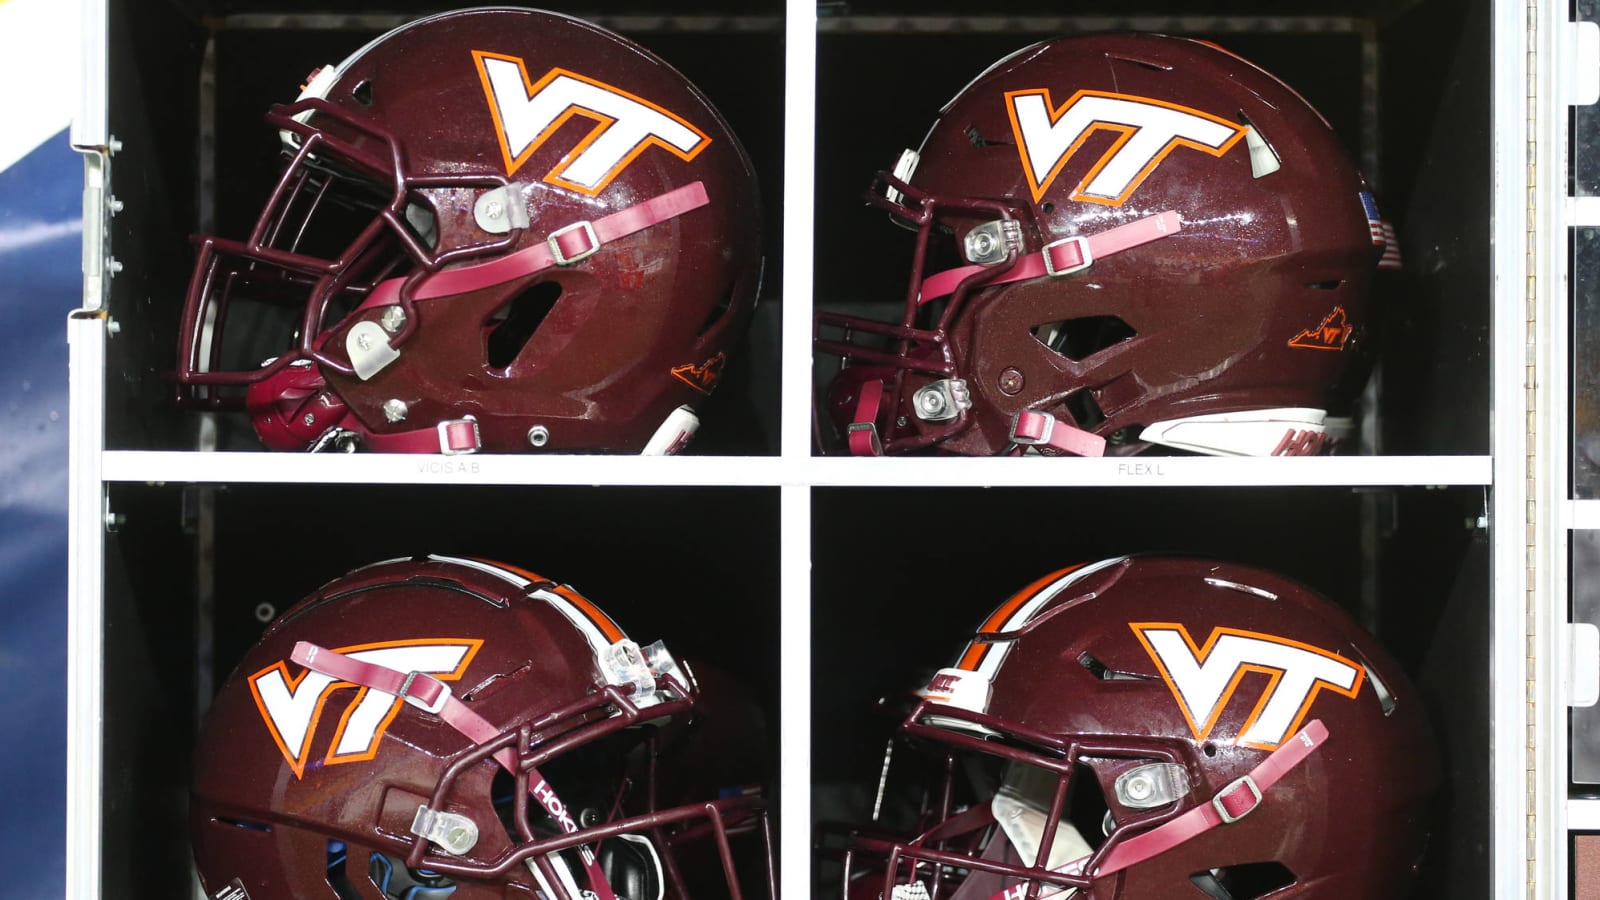 Virginia Tech opts out of bowl game, finishes at 5-6